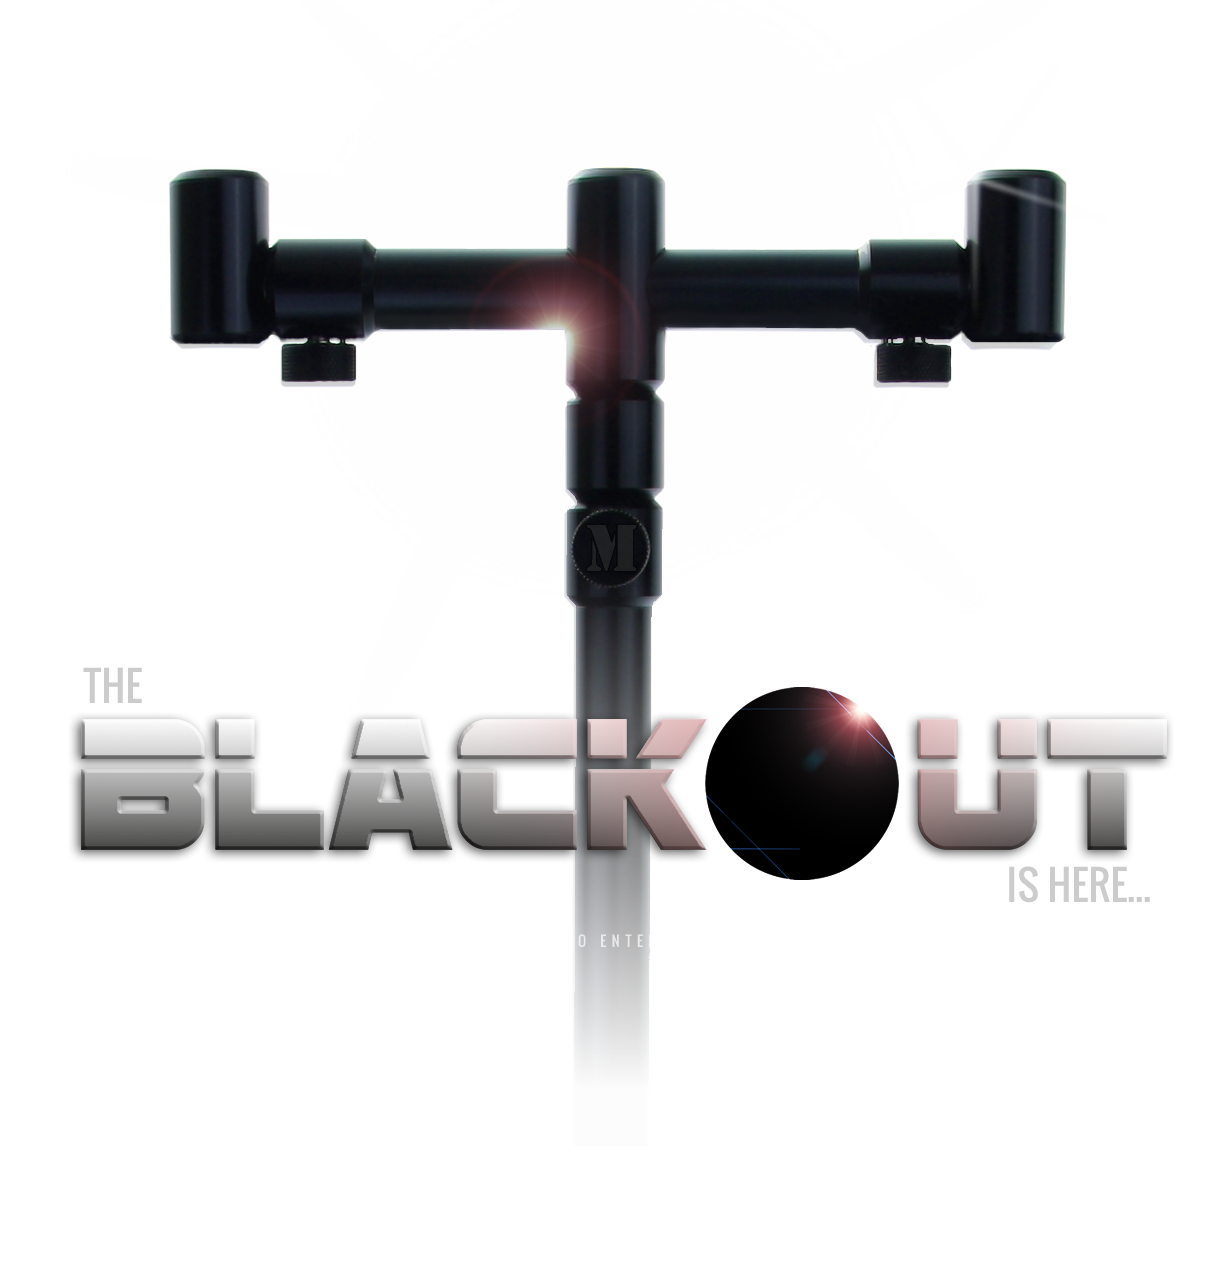 Matrix Innovations - The Blackout is here!